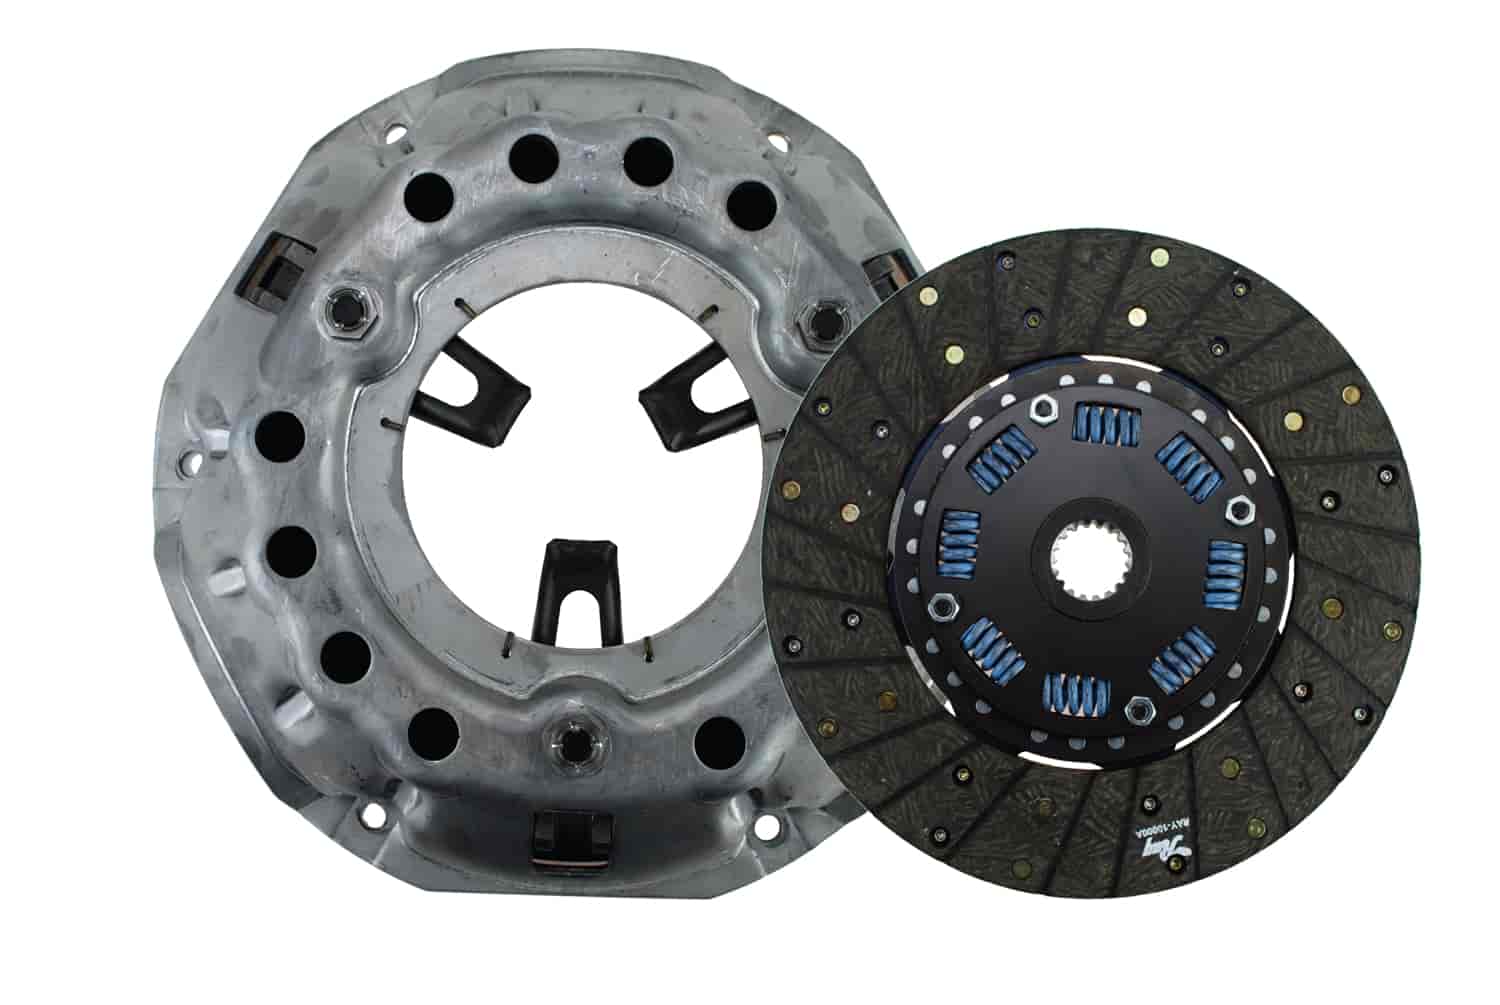 Premium OEM Replacement Clutch Kit Chrysler/Dodge/Plymouth